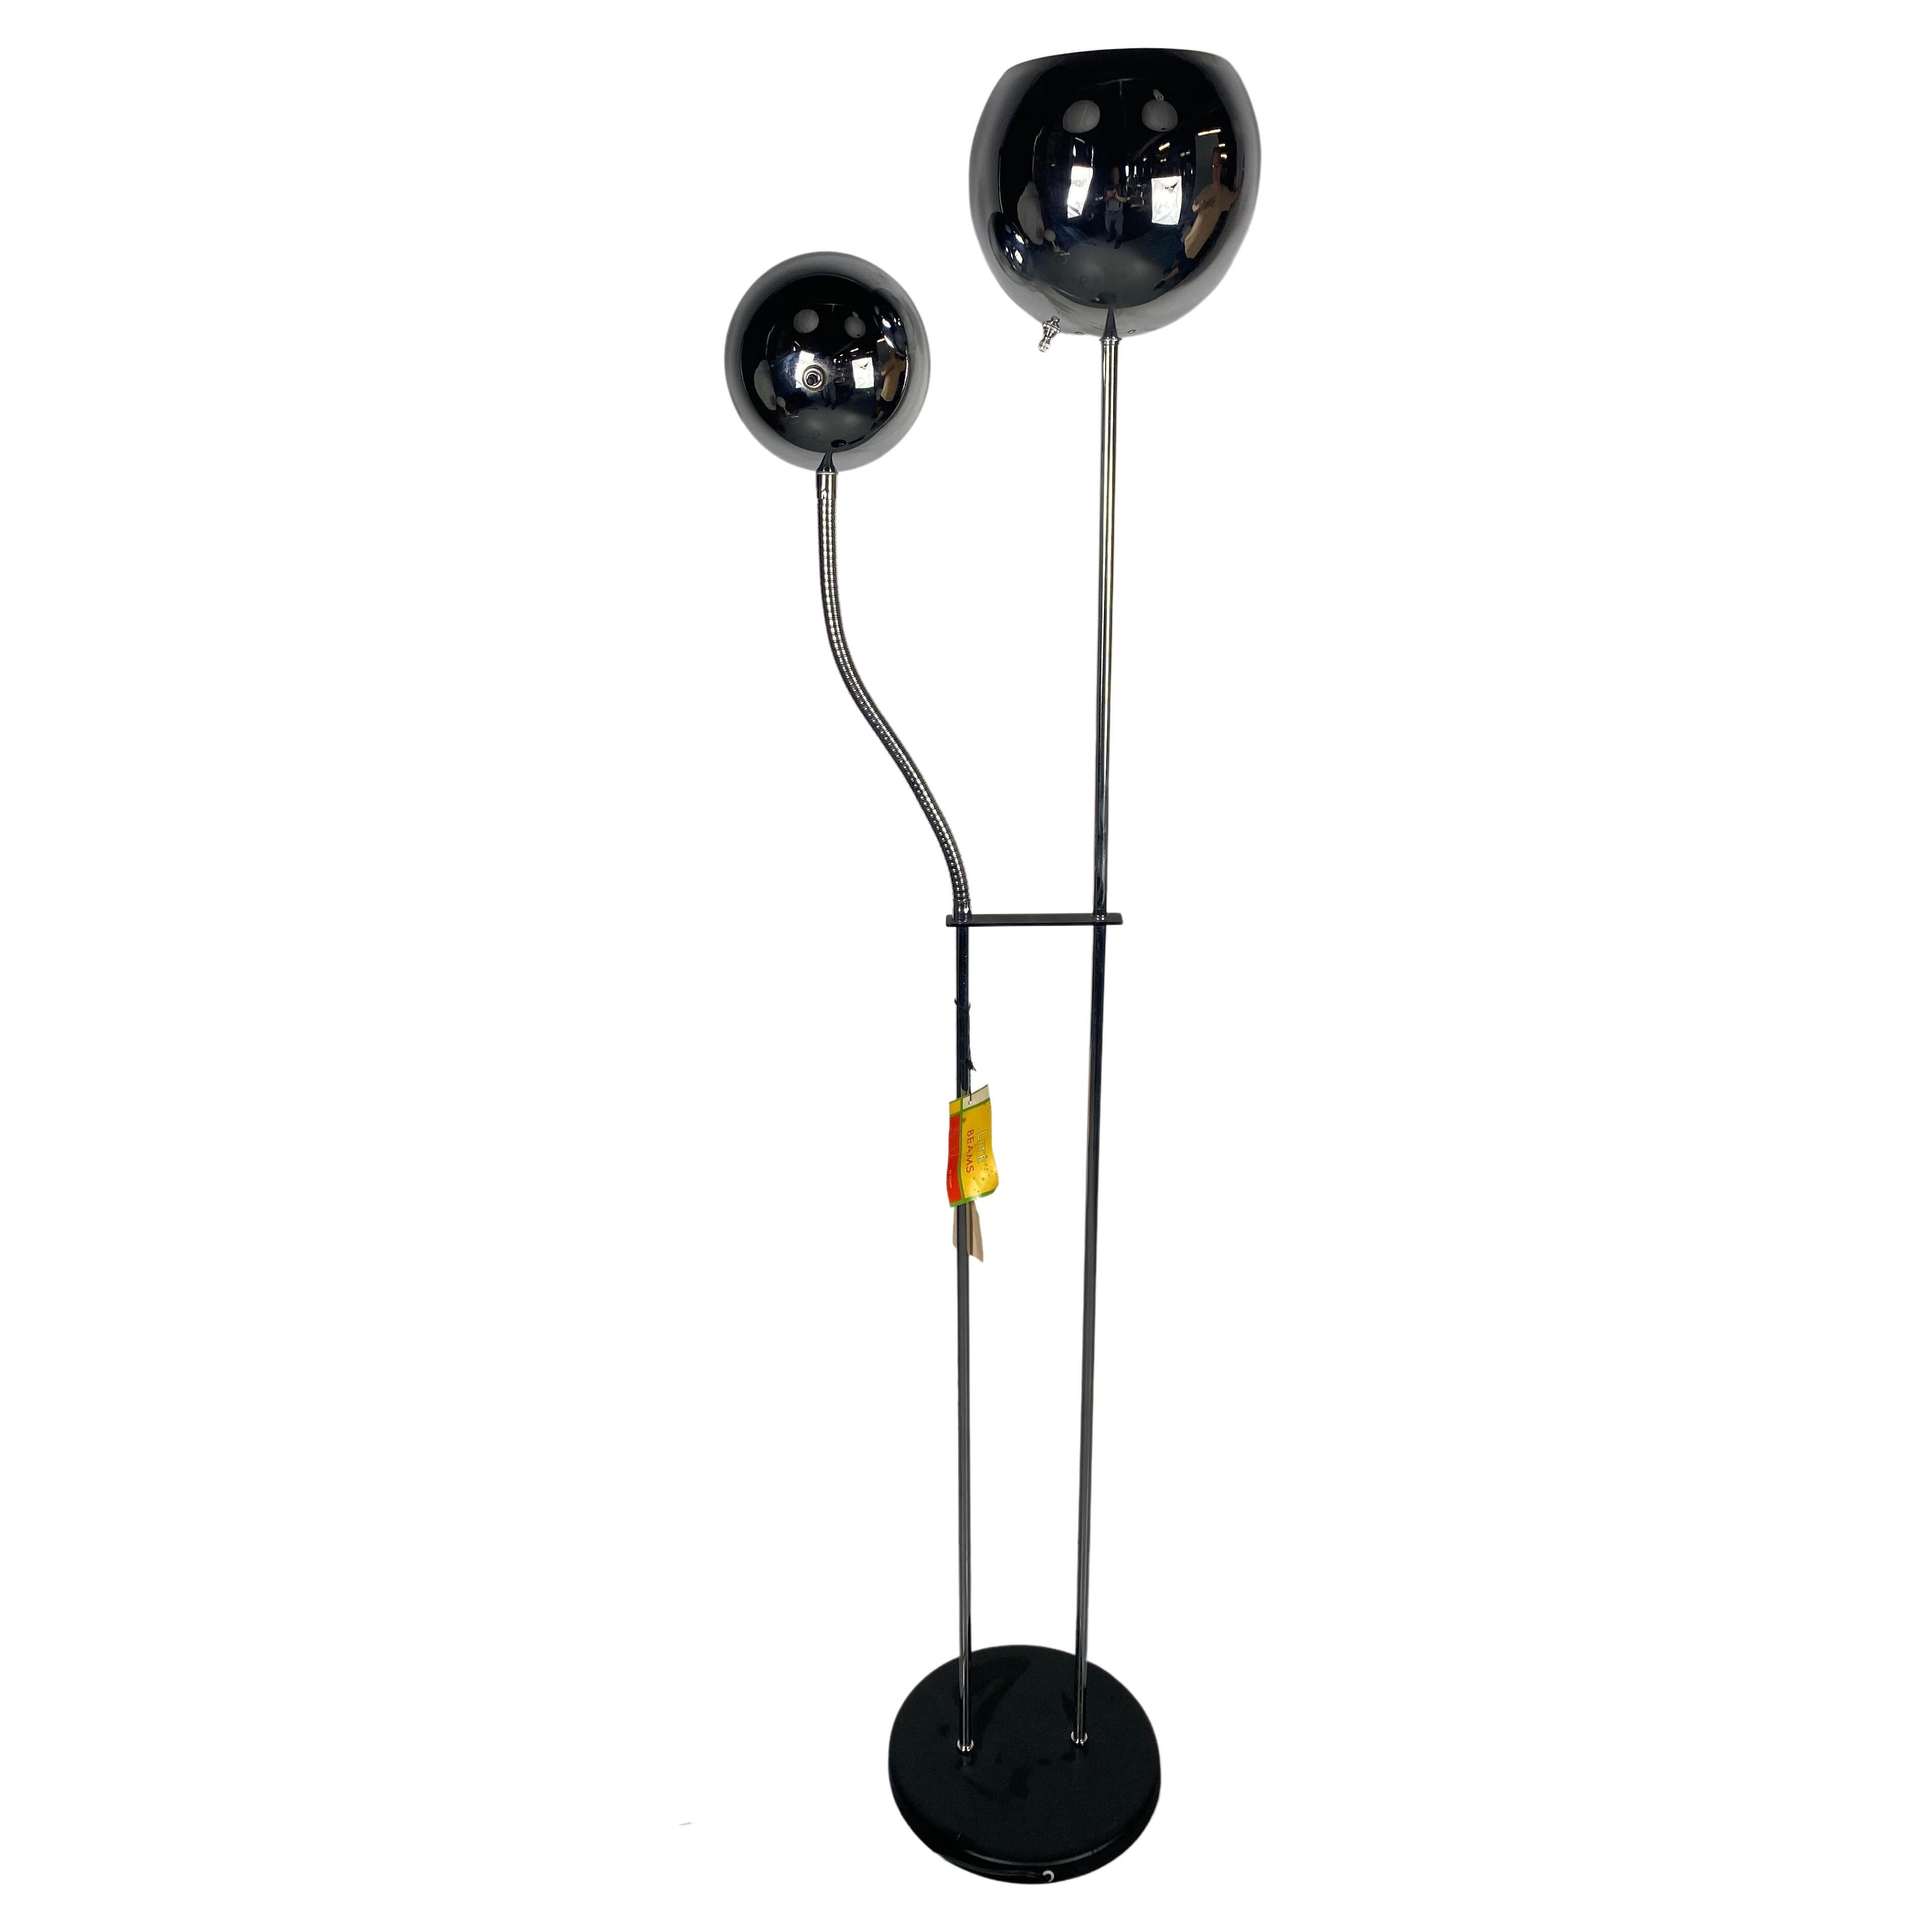 Classic 1970s Double Eye-Ball Chrome Floor Lamp by Lite Beams, After Sonneman For Sale